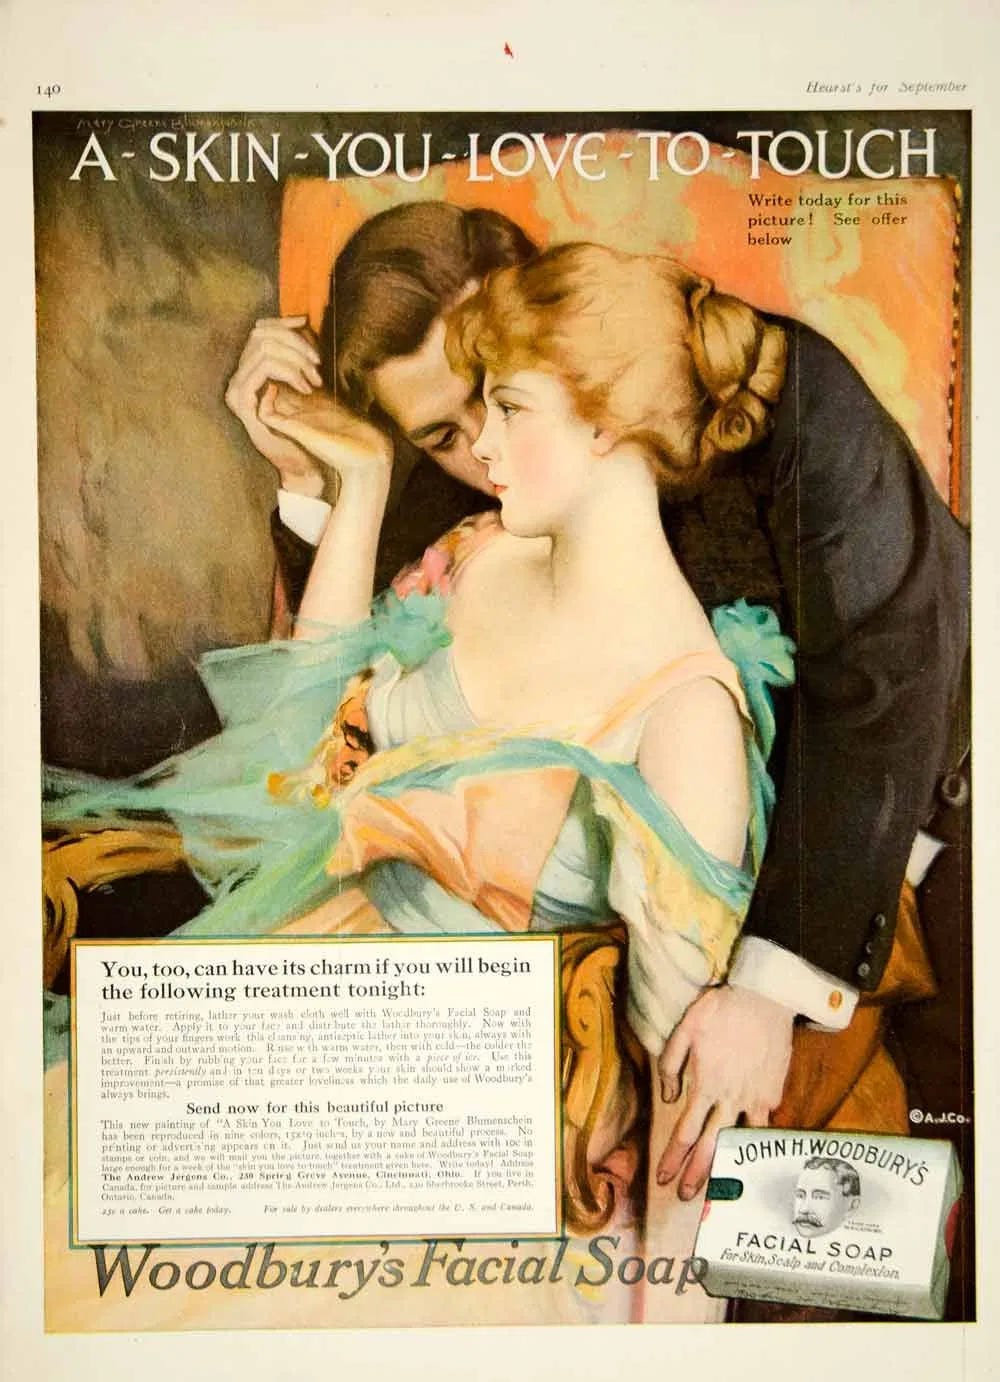 A skin ad from 1916.